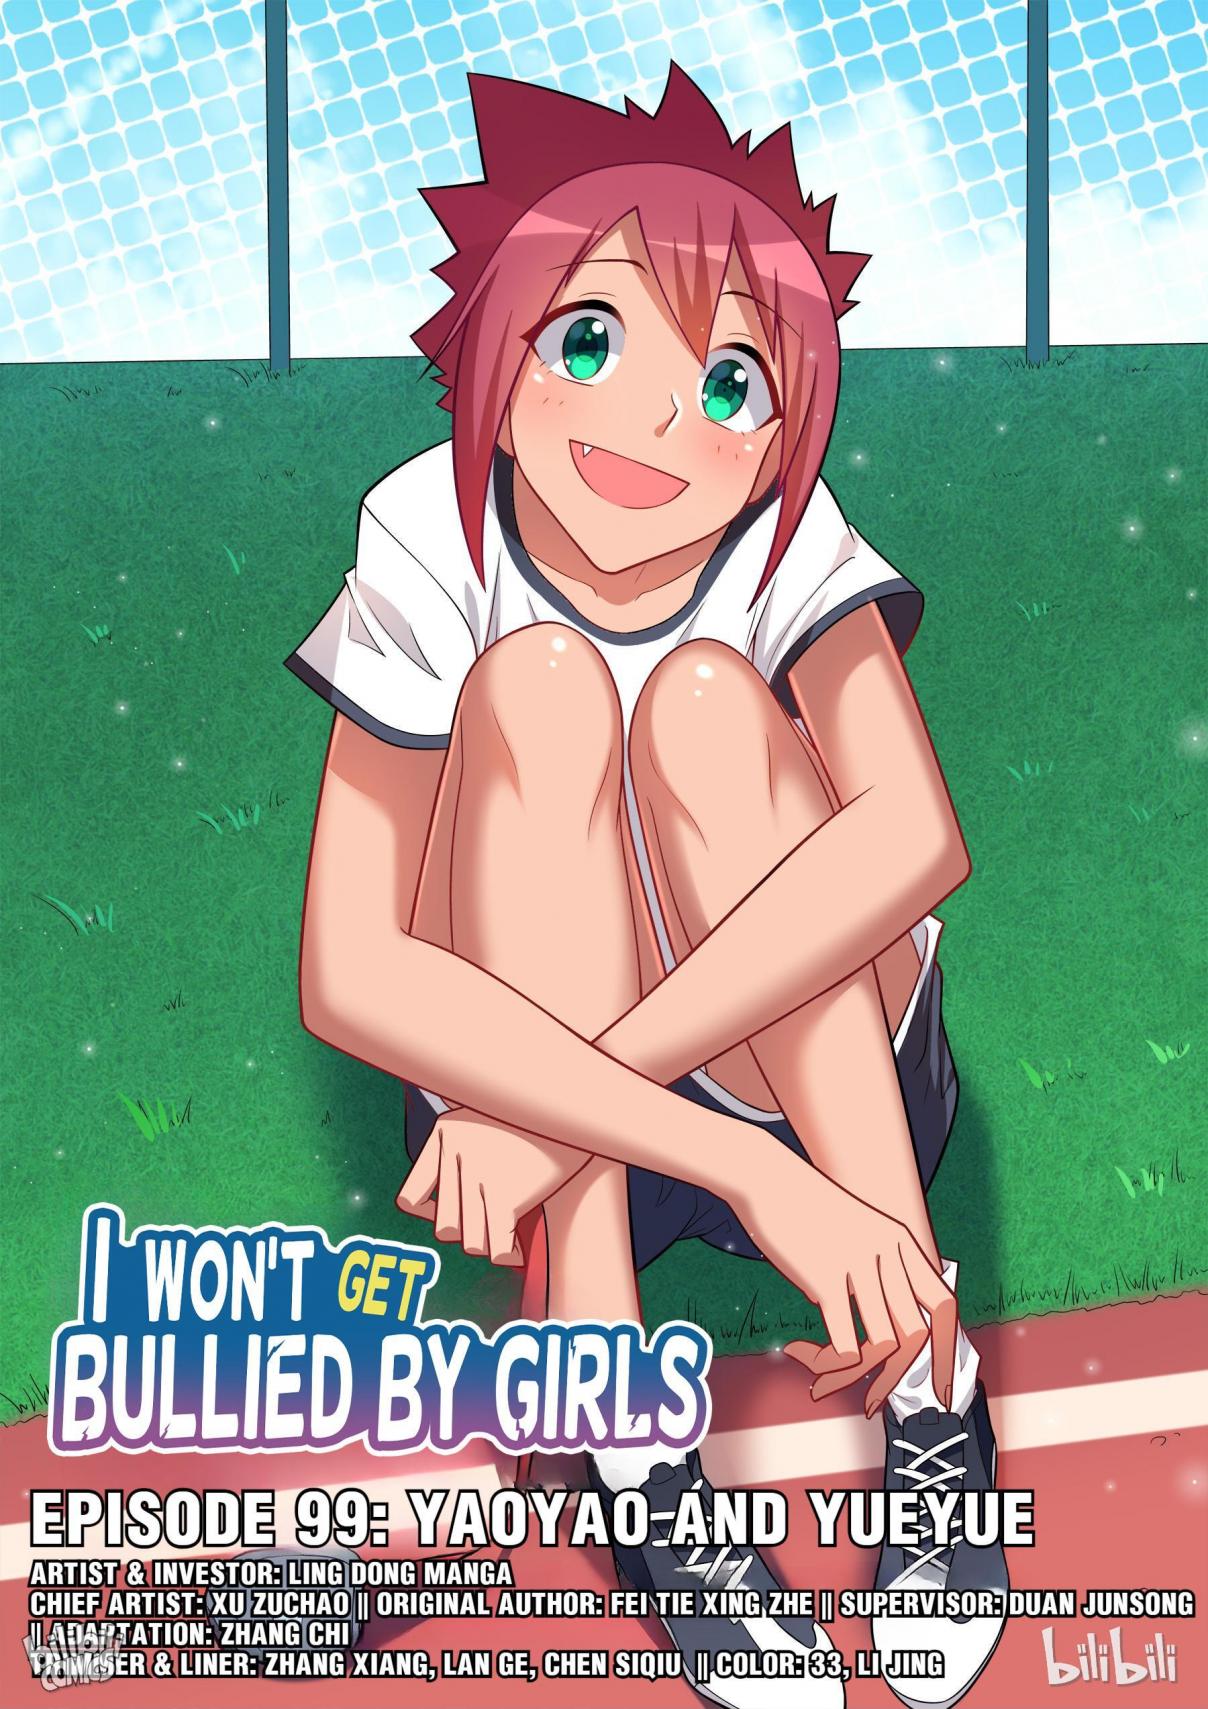 I Don't Want to Be Bullied by Girls 99